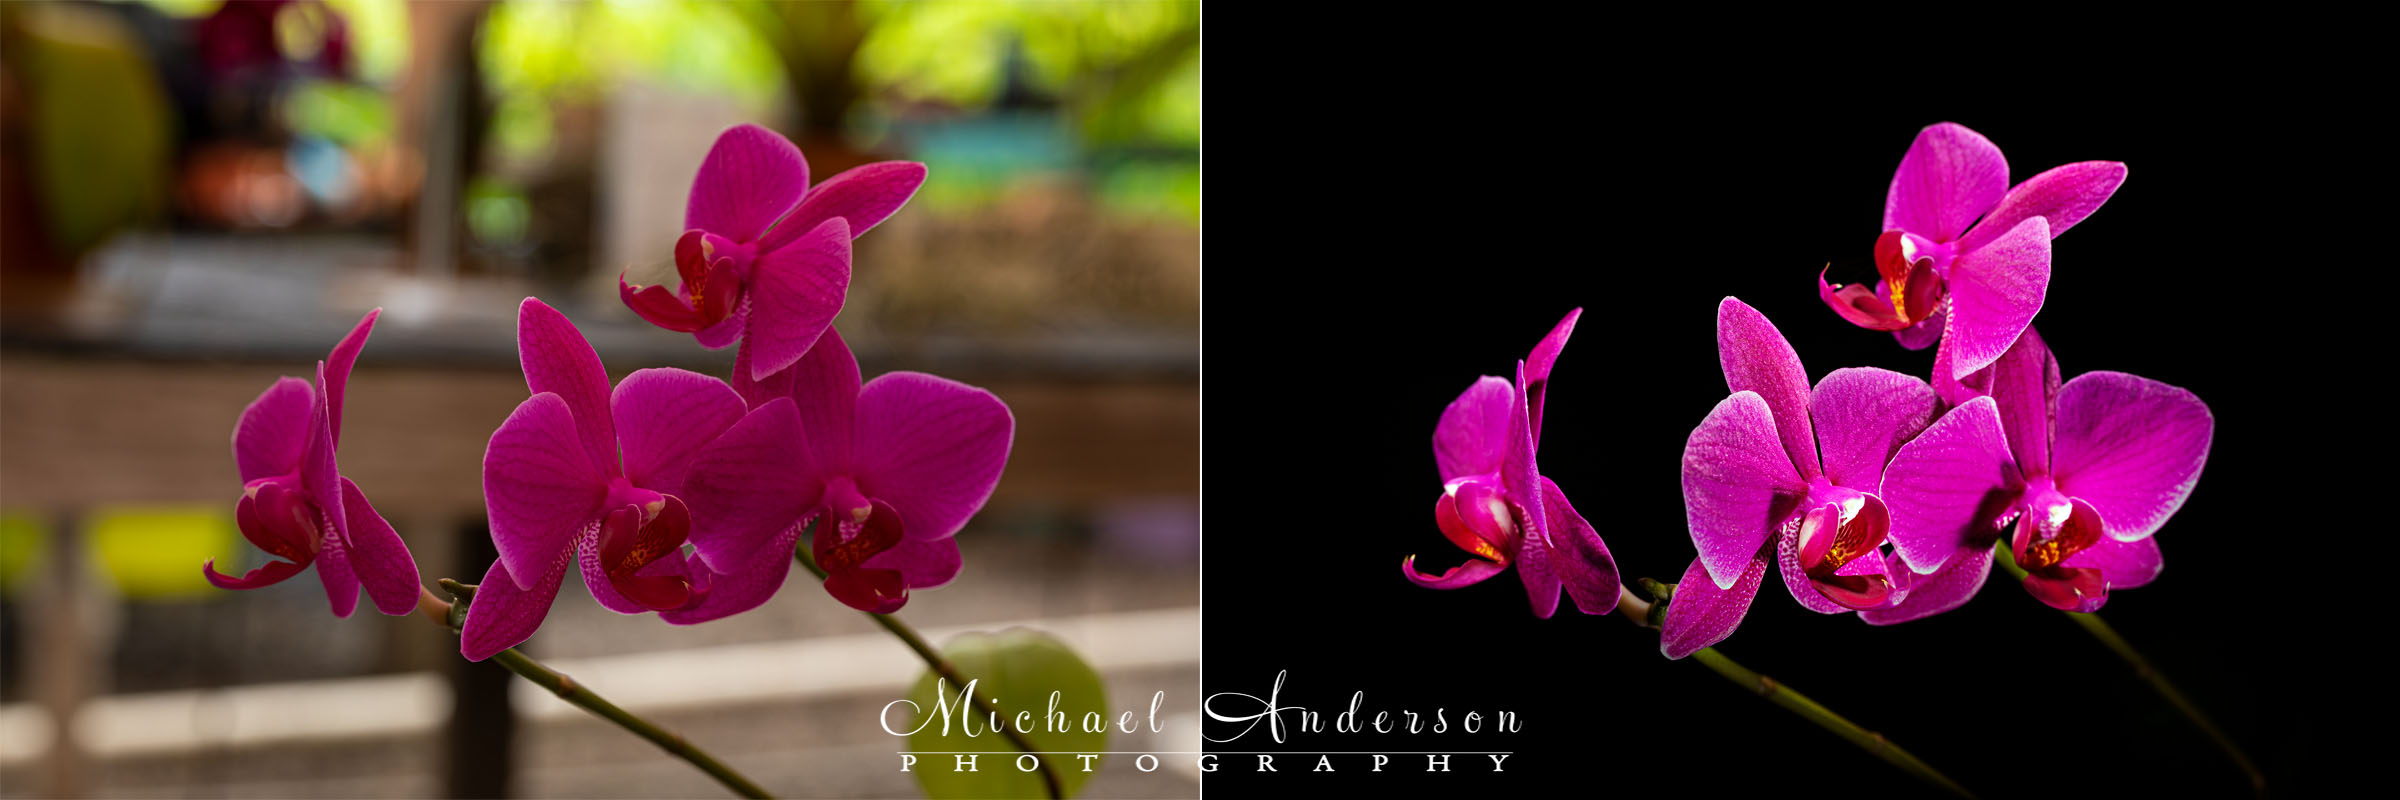 The before and after light painting photos of a Phalaenopsis Orchid.